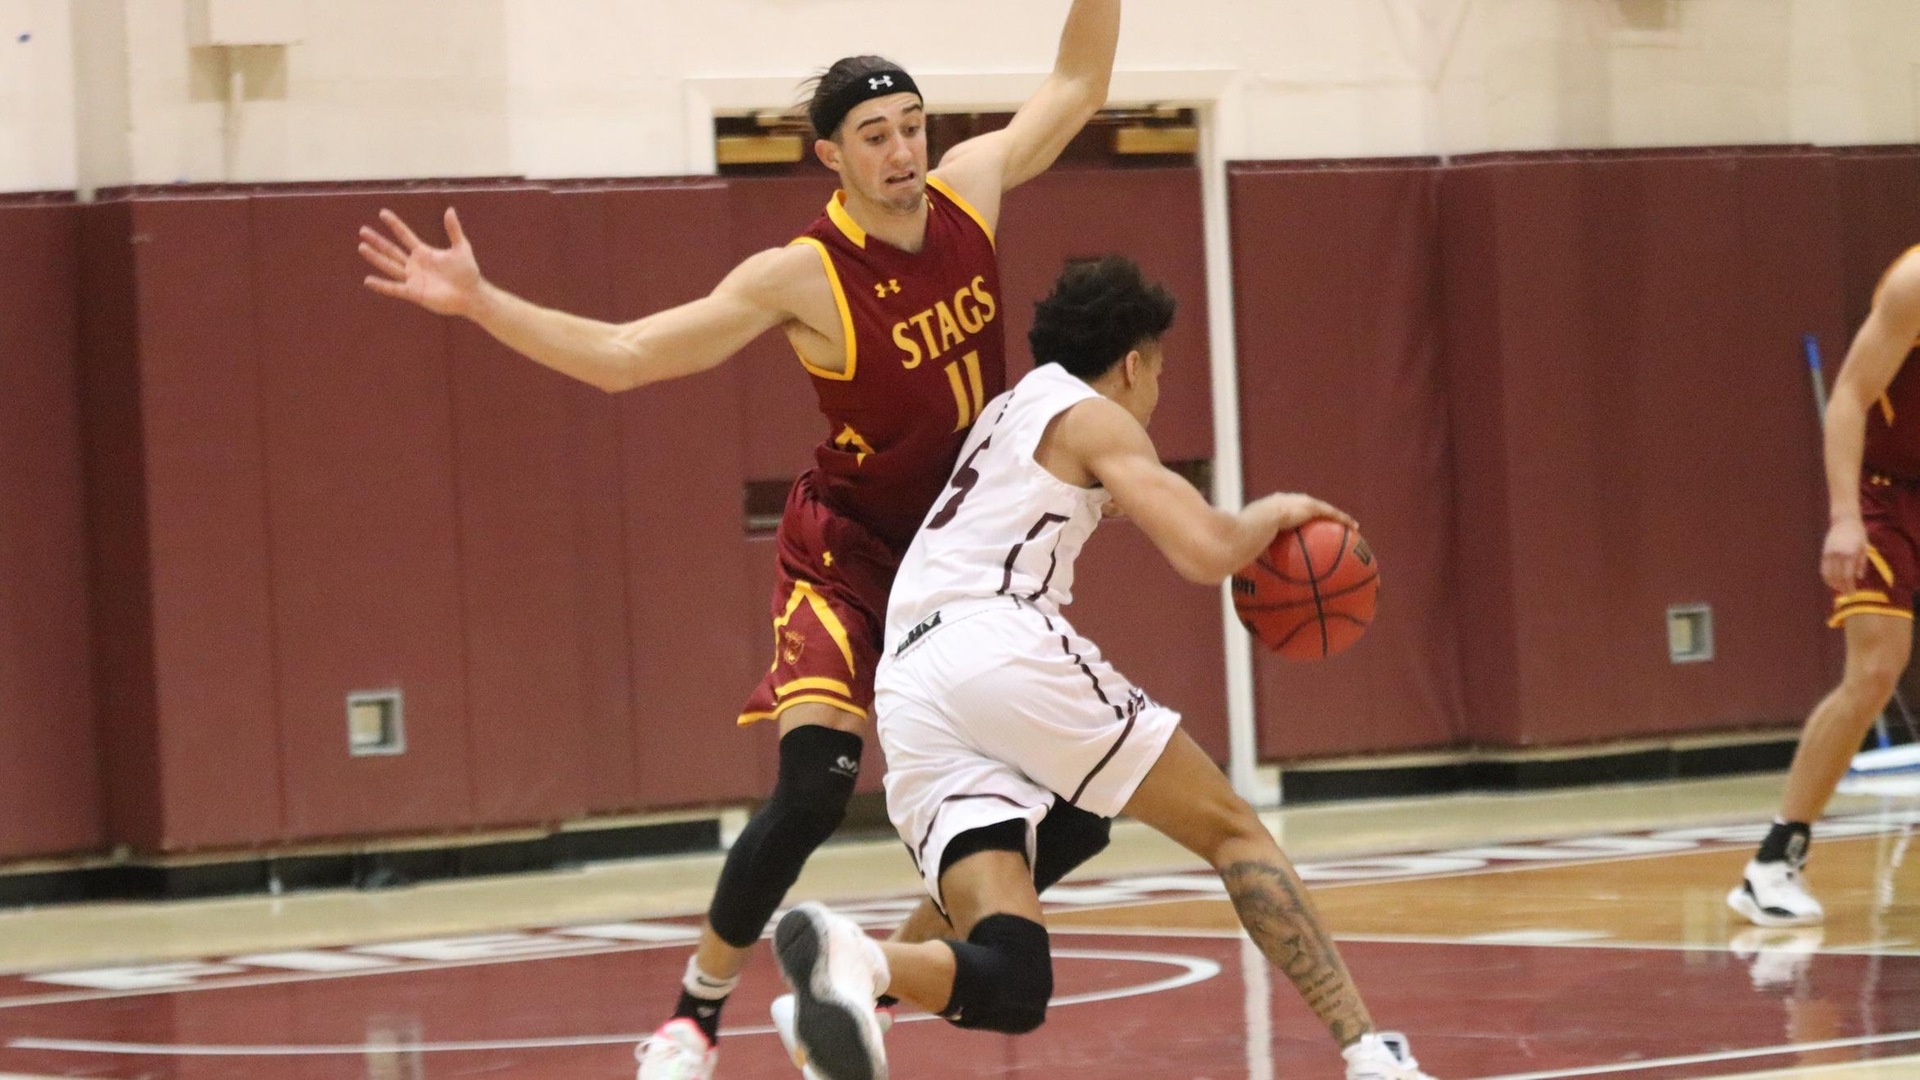 Askew was the second straight SCIAC DPOW winner (photo courtesy of Puget Sound)